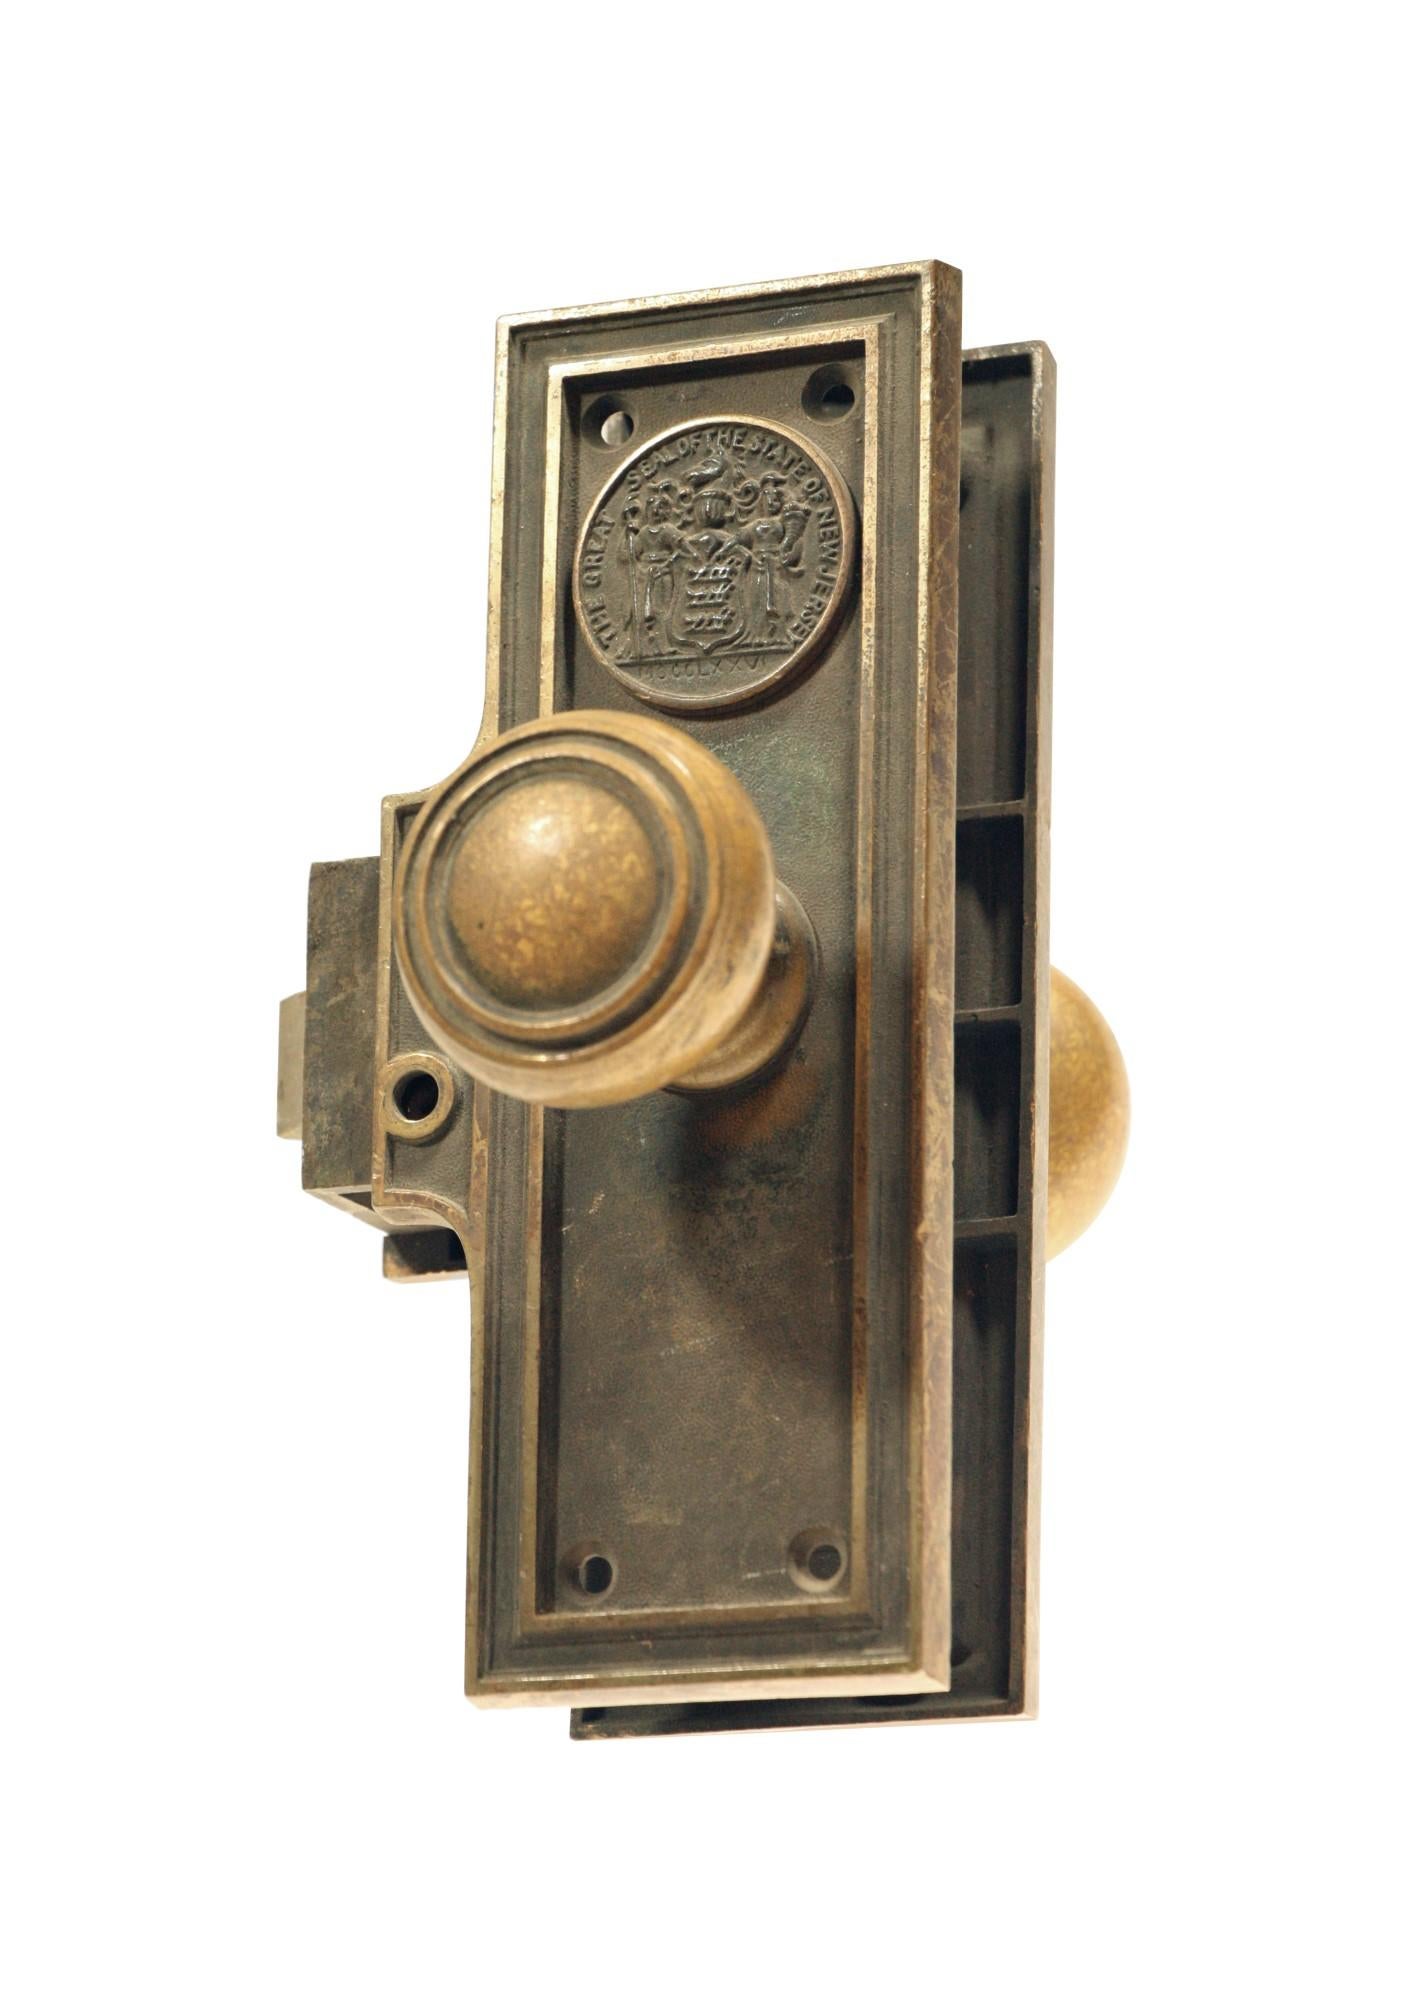 1920s Corbin unit lock set with an emblematic back plate that reads 'The great State of New Jersey, XOCCLXXVI' and a concentric style knob. Set includes a pair of doorknobs, two back plates, and an attached lock. Collectable. Unit locks were meant